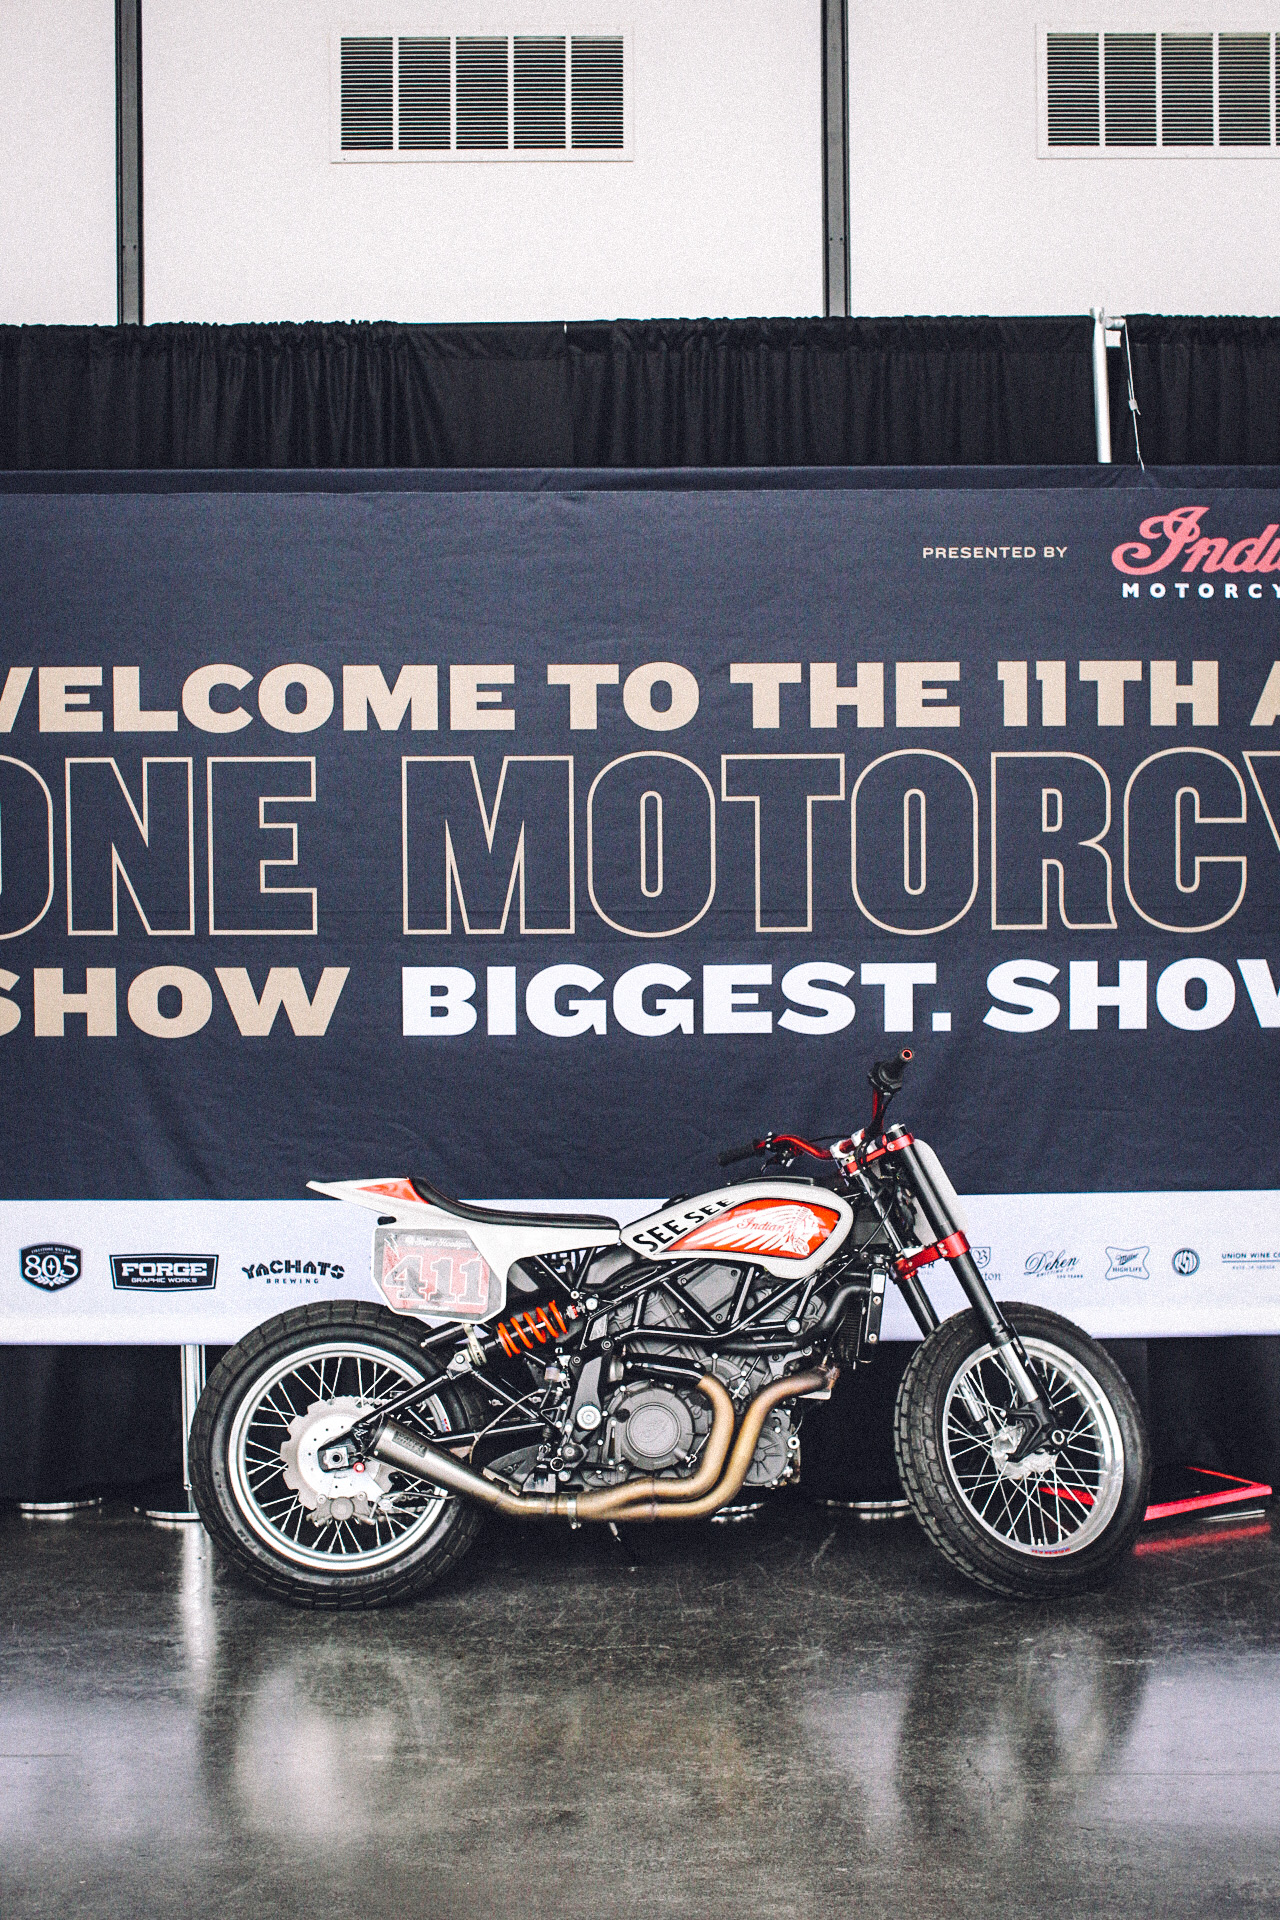 Indian Hooligan racer at The One Motorcycle Show